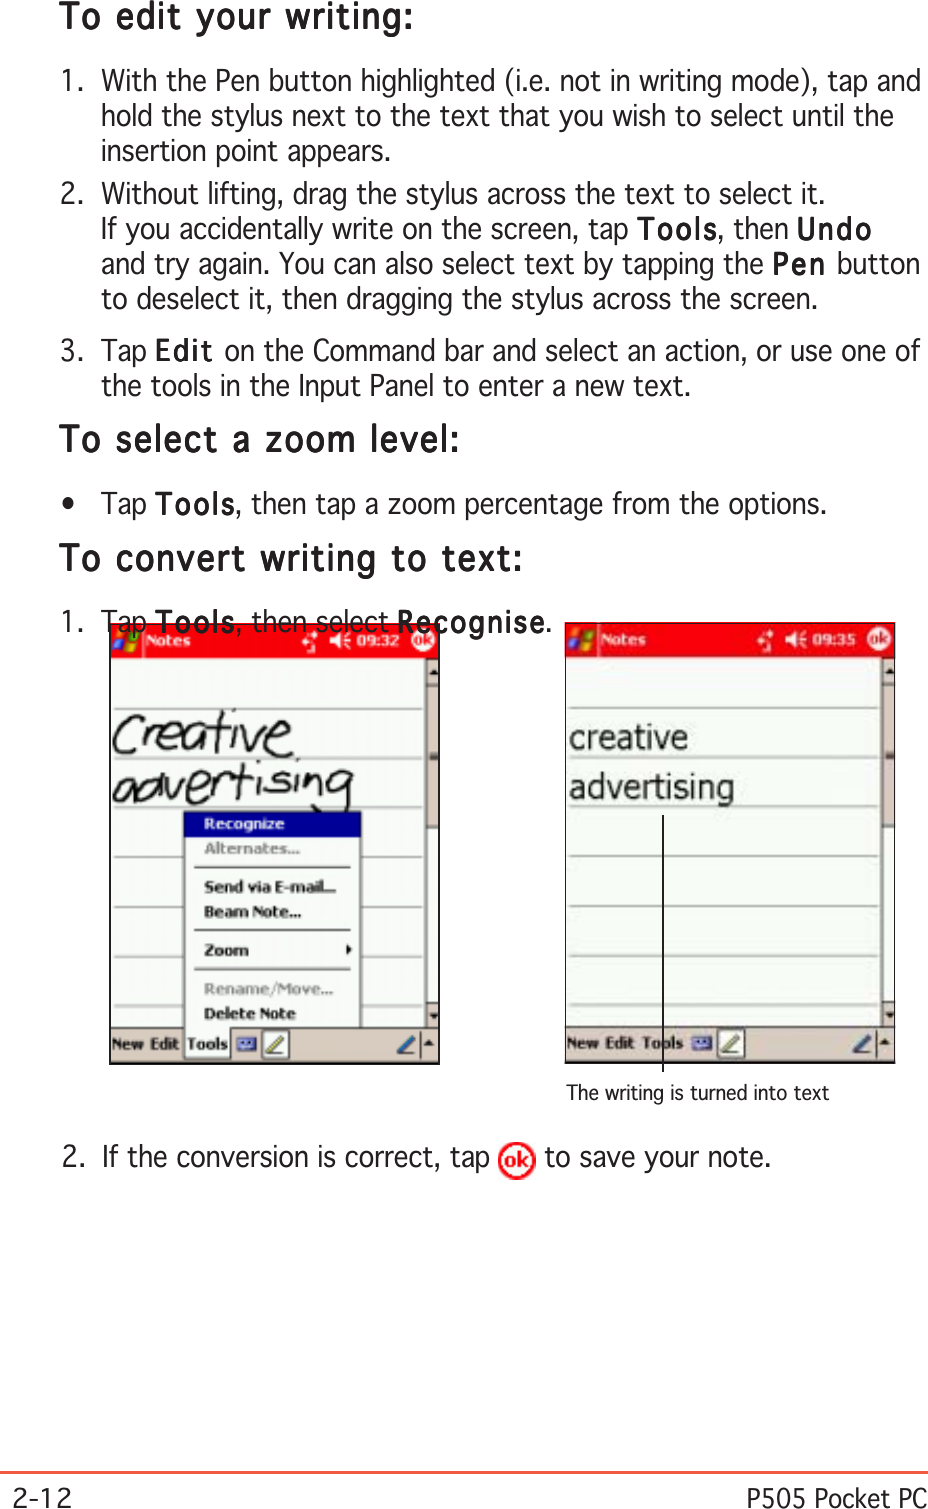 2-12P505 Pocket PCThe writing is turned into textTo edit your writing:To edit your writing:To edit your writing:To edit your writing:To edit your writing:1. With the Pen button highlighted (i.e. not in writing mode), tap andhold the stylus next to the text that you wish to select until theinsertion point appears.2. Without lifting, drag the stylus across the text to select it.If you accidentally write on the screen, tap ToolsToolsToolsToolsTools, then UndoUndoUndoUndoUndoand try again. You can also select text by tapping the PenPenPenPenPe n buttonto deselect it, then dragging the stylus across the screen.3. Tap EditEditEditEditEd i t on the Command bar and select an action, or use one ofthe tools in the Input Panel to enter a new text.To select a zoom level:To select a zoom level:To select a zoom level:To select a zoom level:To select a zoom level:•Tap ToolsToolsToolsToolsTo ols, then tap a zoom percentage from the options.To convert writing to text:To convert writing to text:To convert writing to text:To convert writing to text:To convert writing to text:1. Tap ToolsToolsToolsToolsTo ols, then select RecogniseRecogniseRecogniseRecogniseRecognise.2. If the conversion is correct, tap   to save your note.